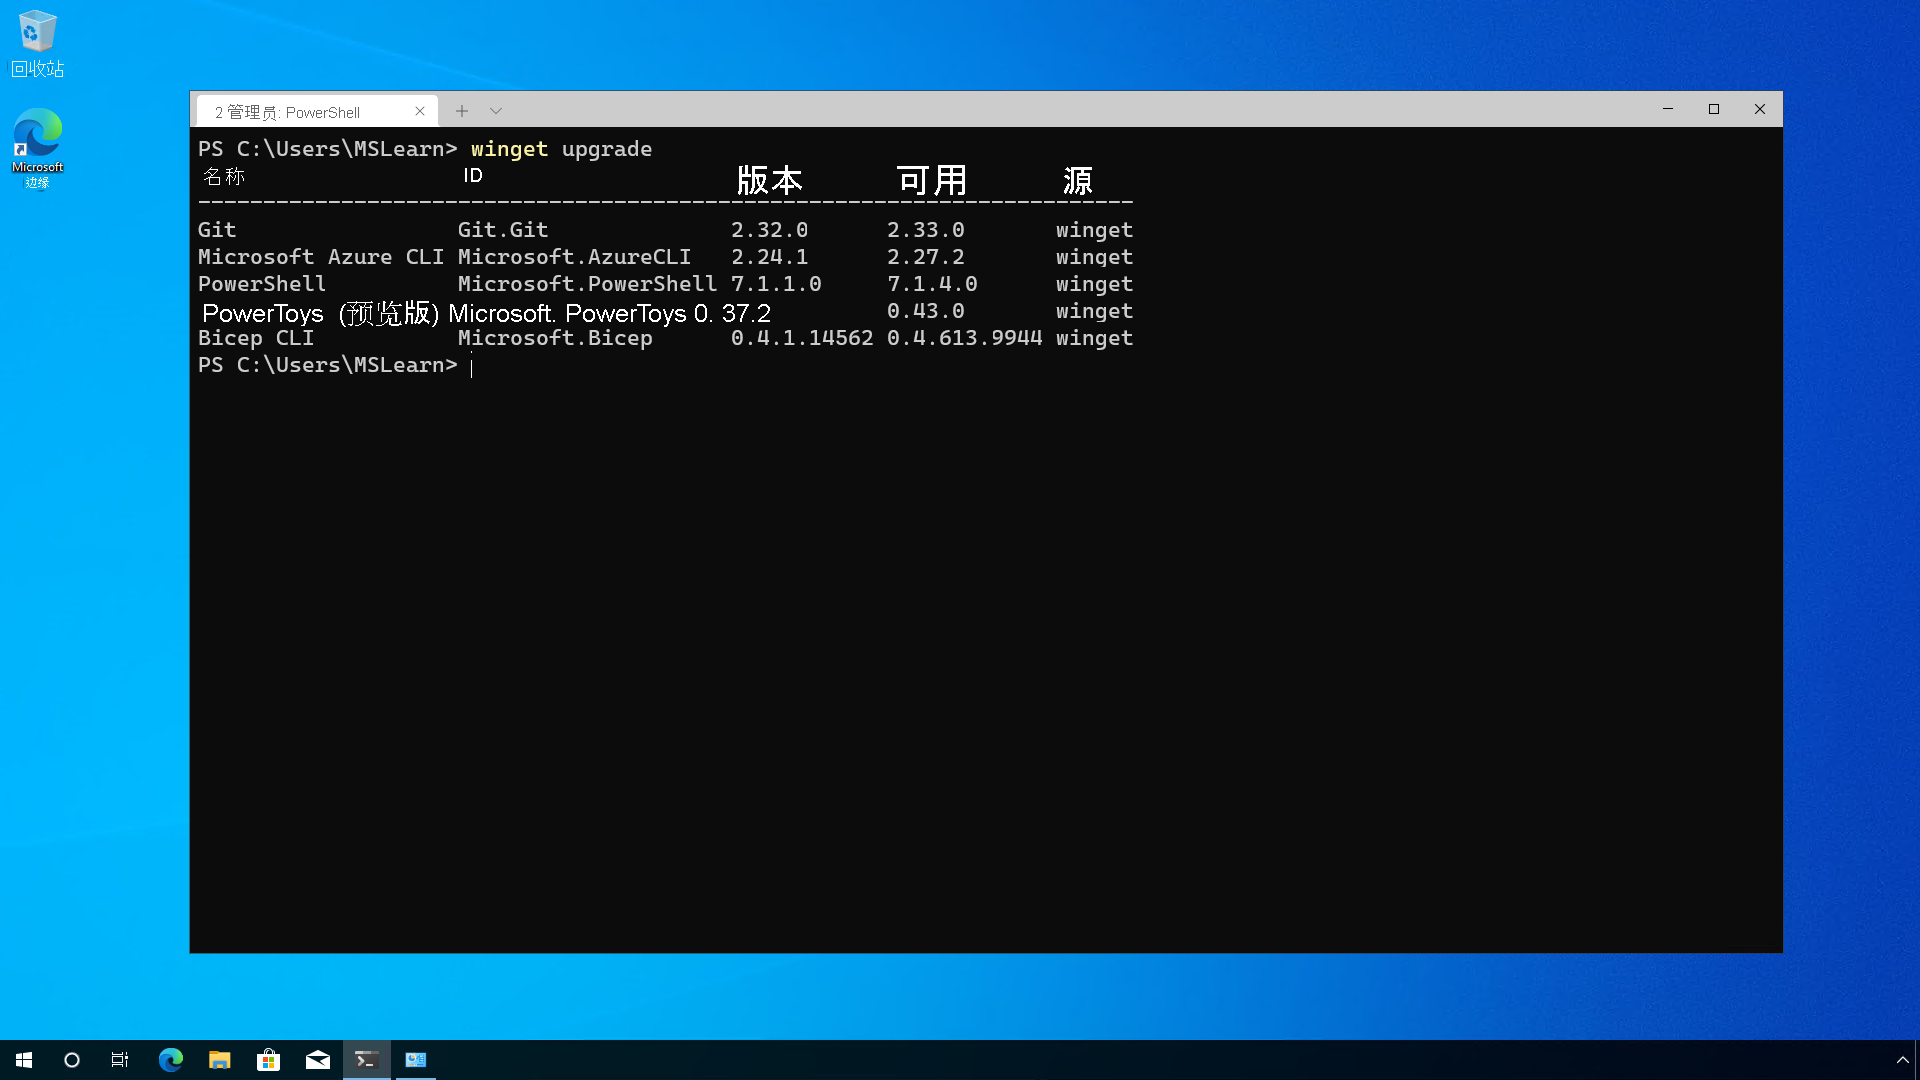 Windows Package Manager upgrade command